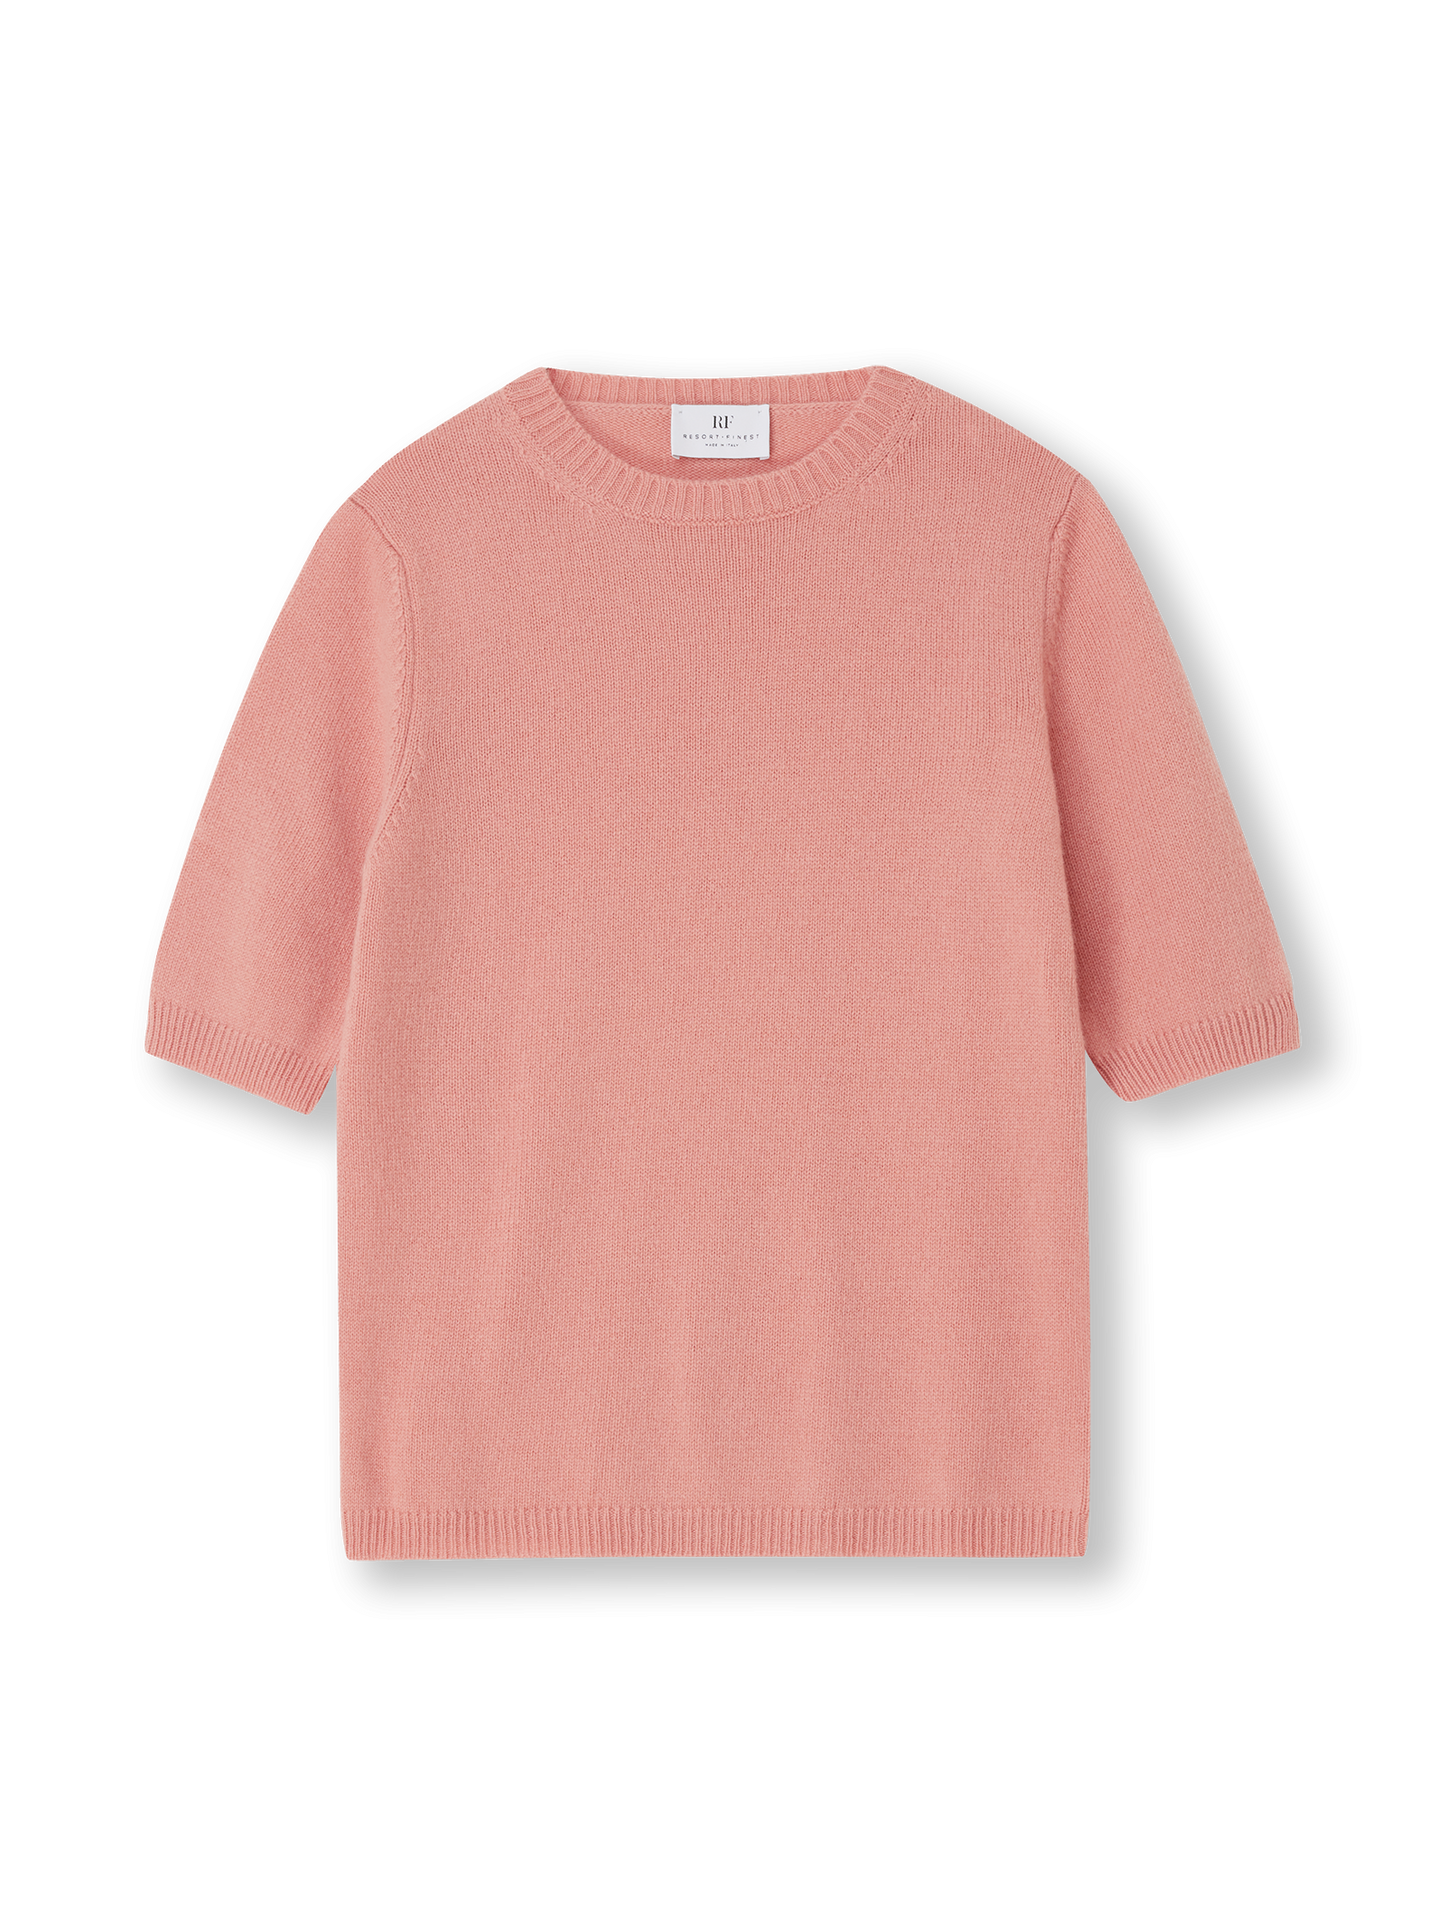 Knitted Tee | Cashmere | blush